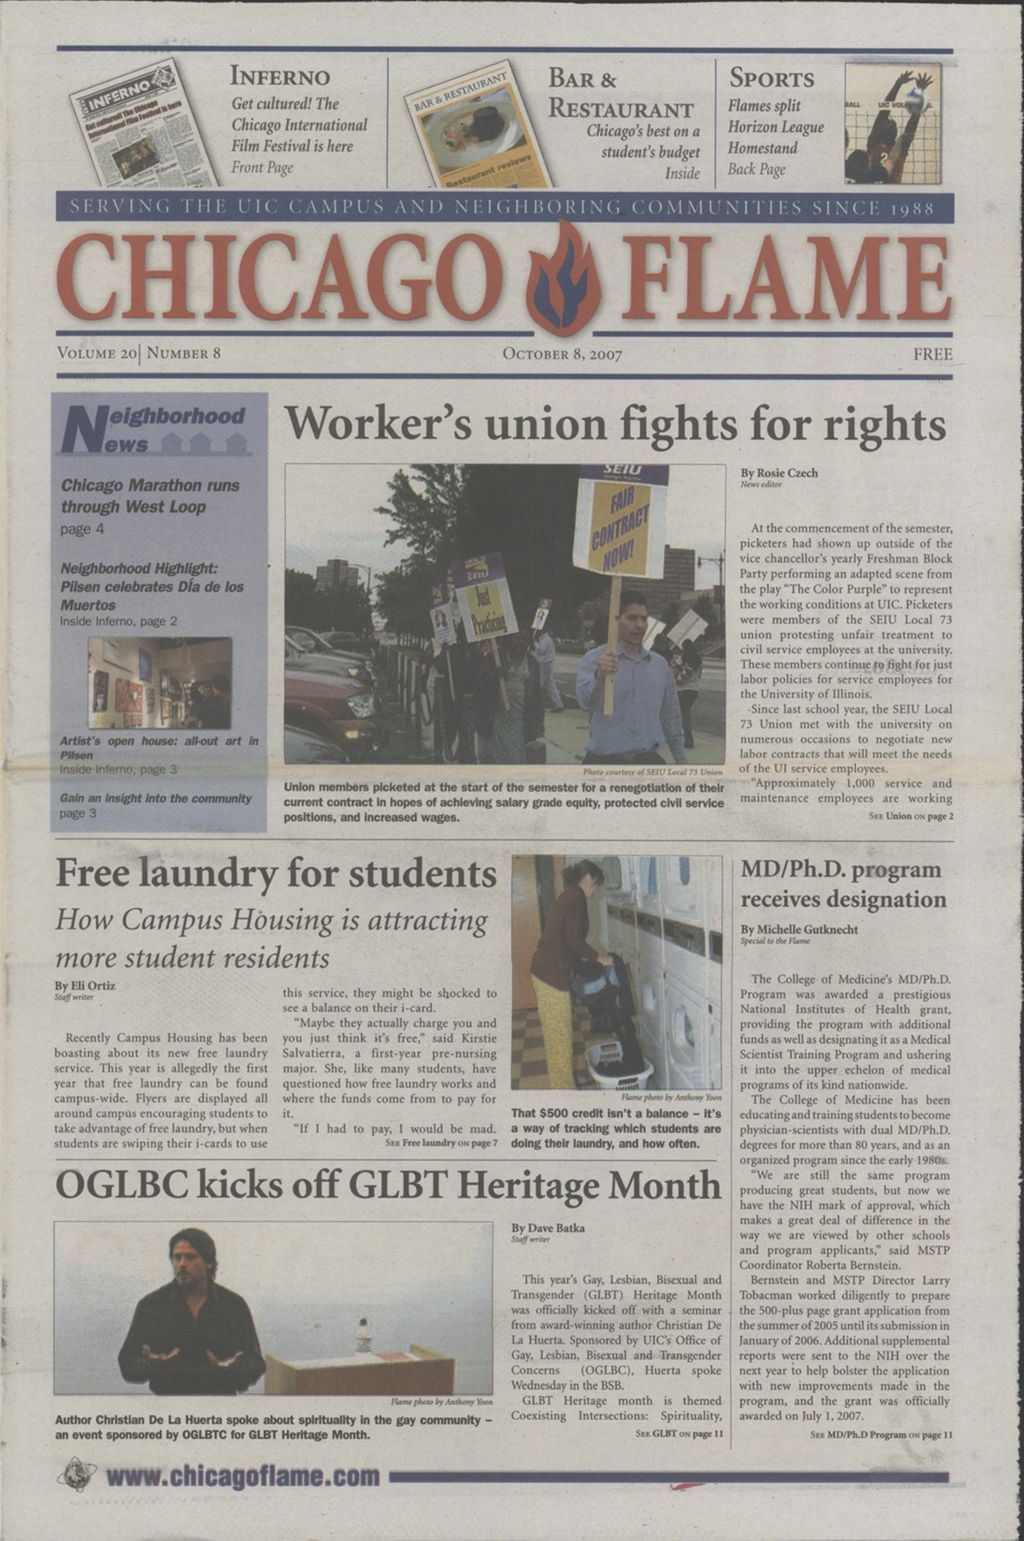 Miniature of Chicago Flame (October 8, 2007)